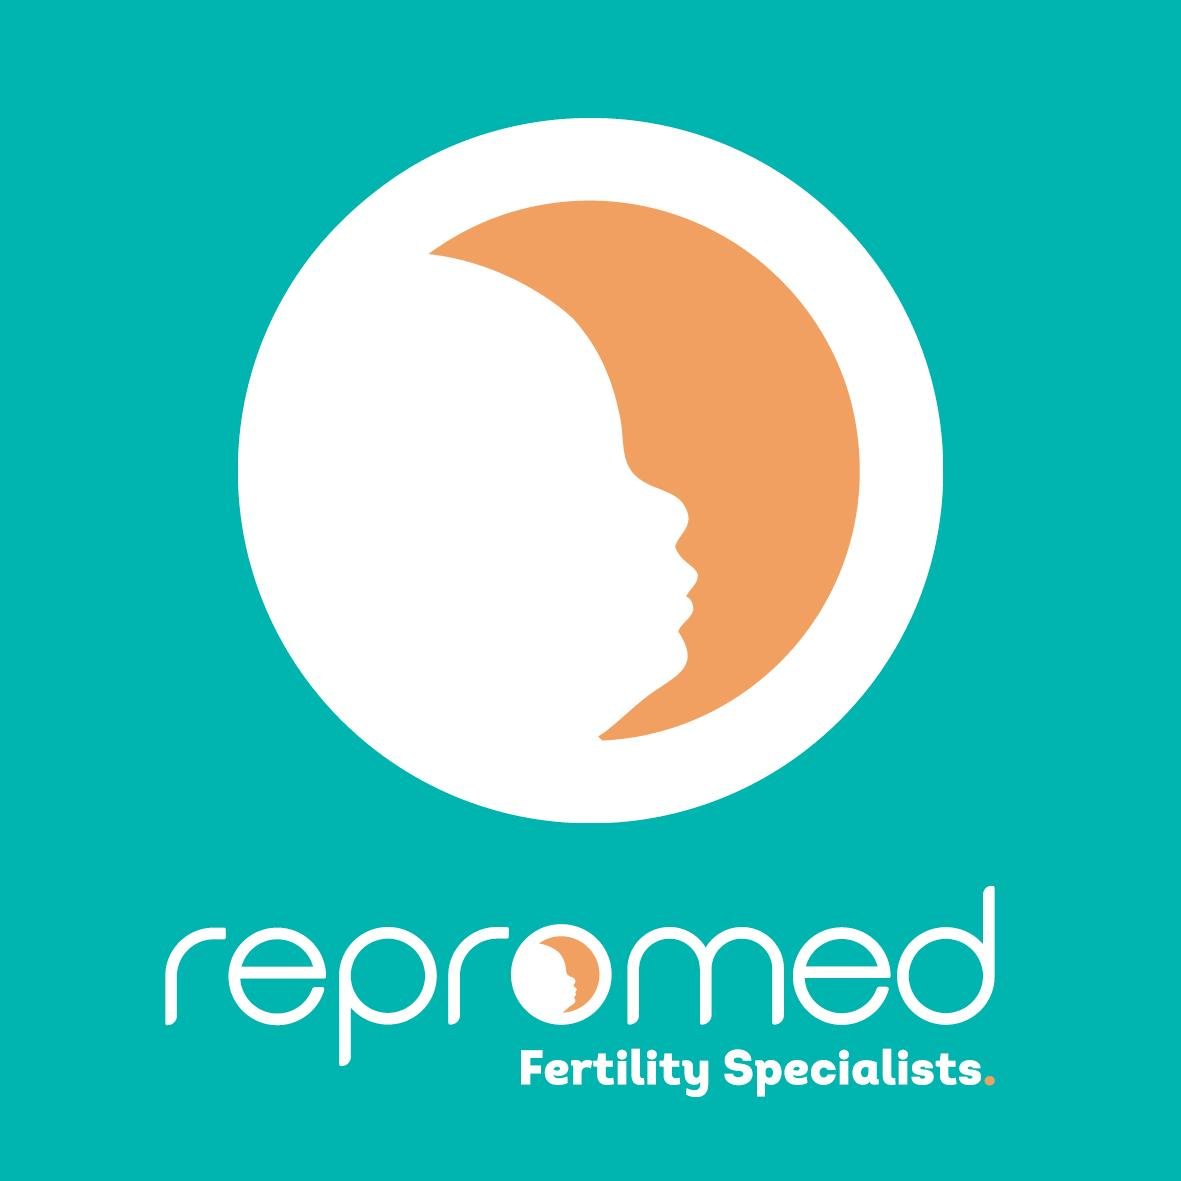 Repromed Fertility and IVF Specialists. At Repromed our goal is simple: to help you realise your dream of having a family.